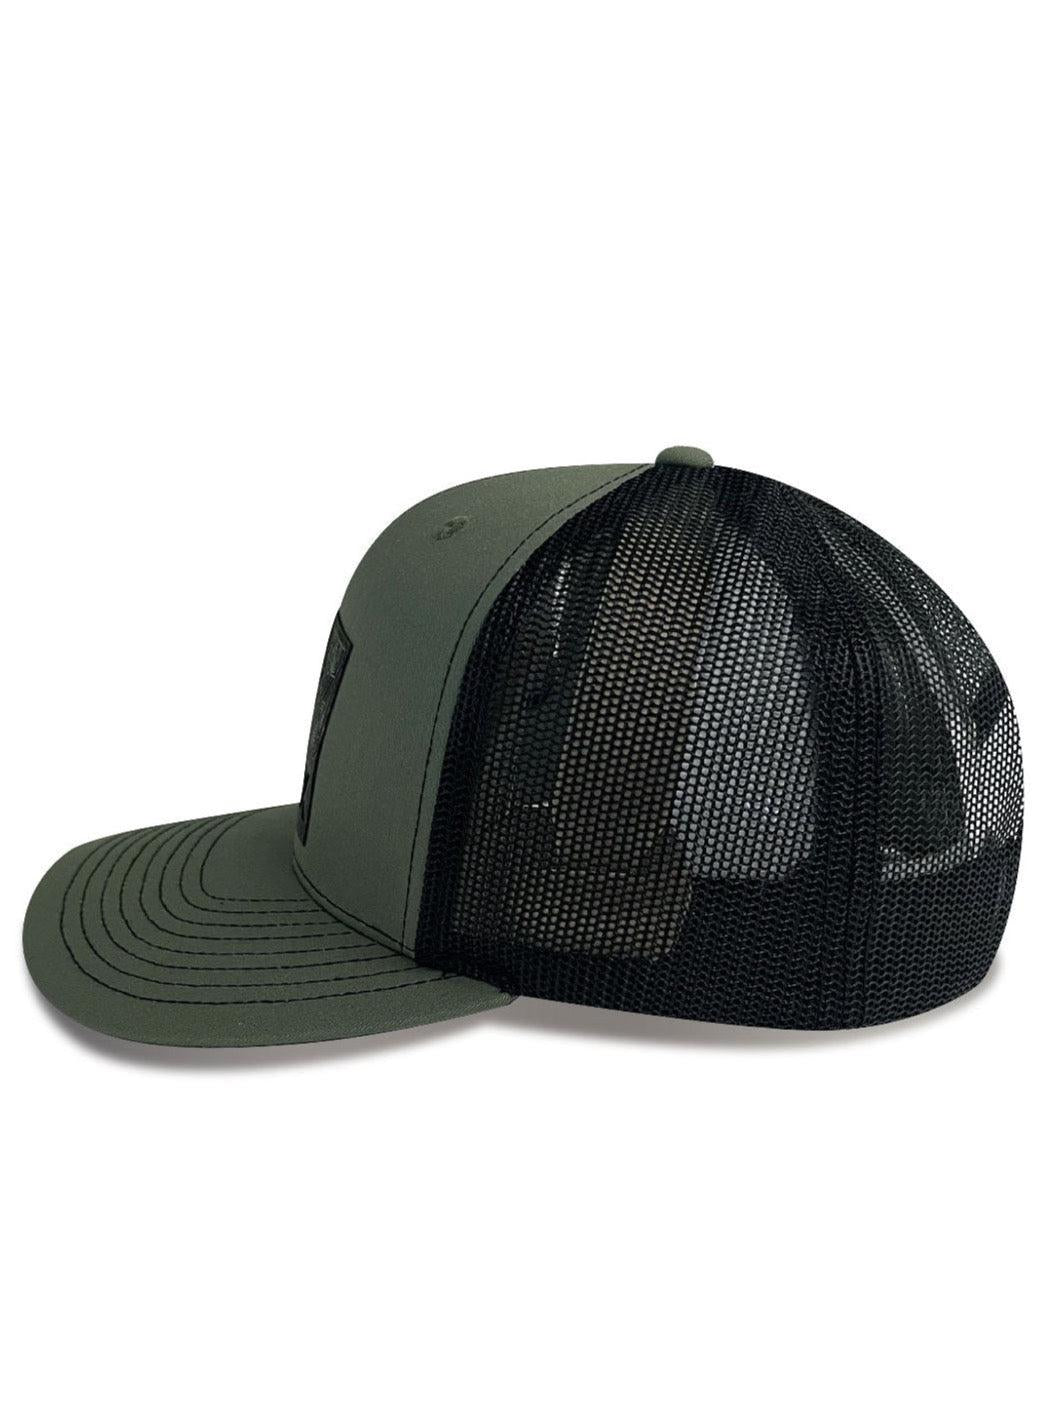 Leather Patch Trucker Hat - Country Grounds Coffee